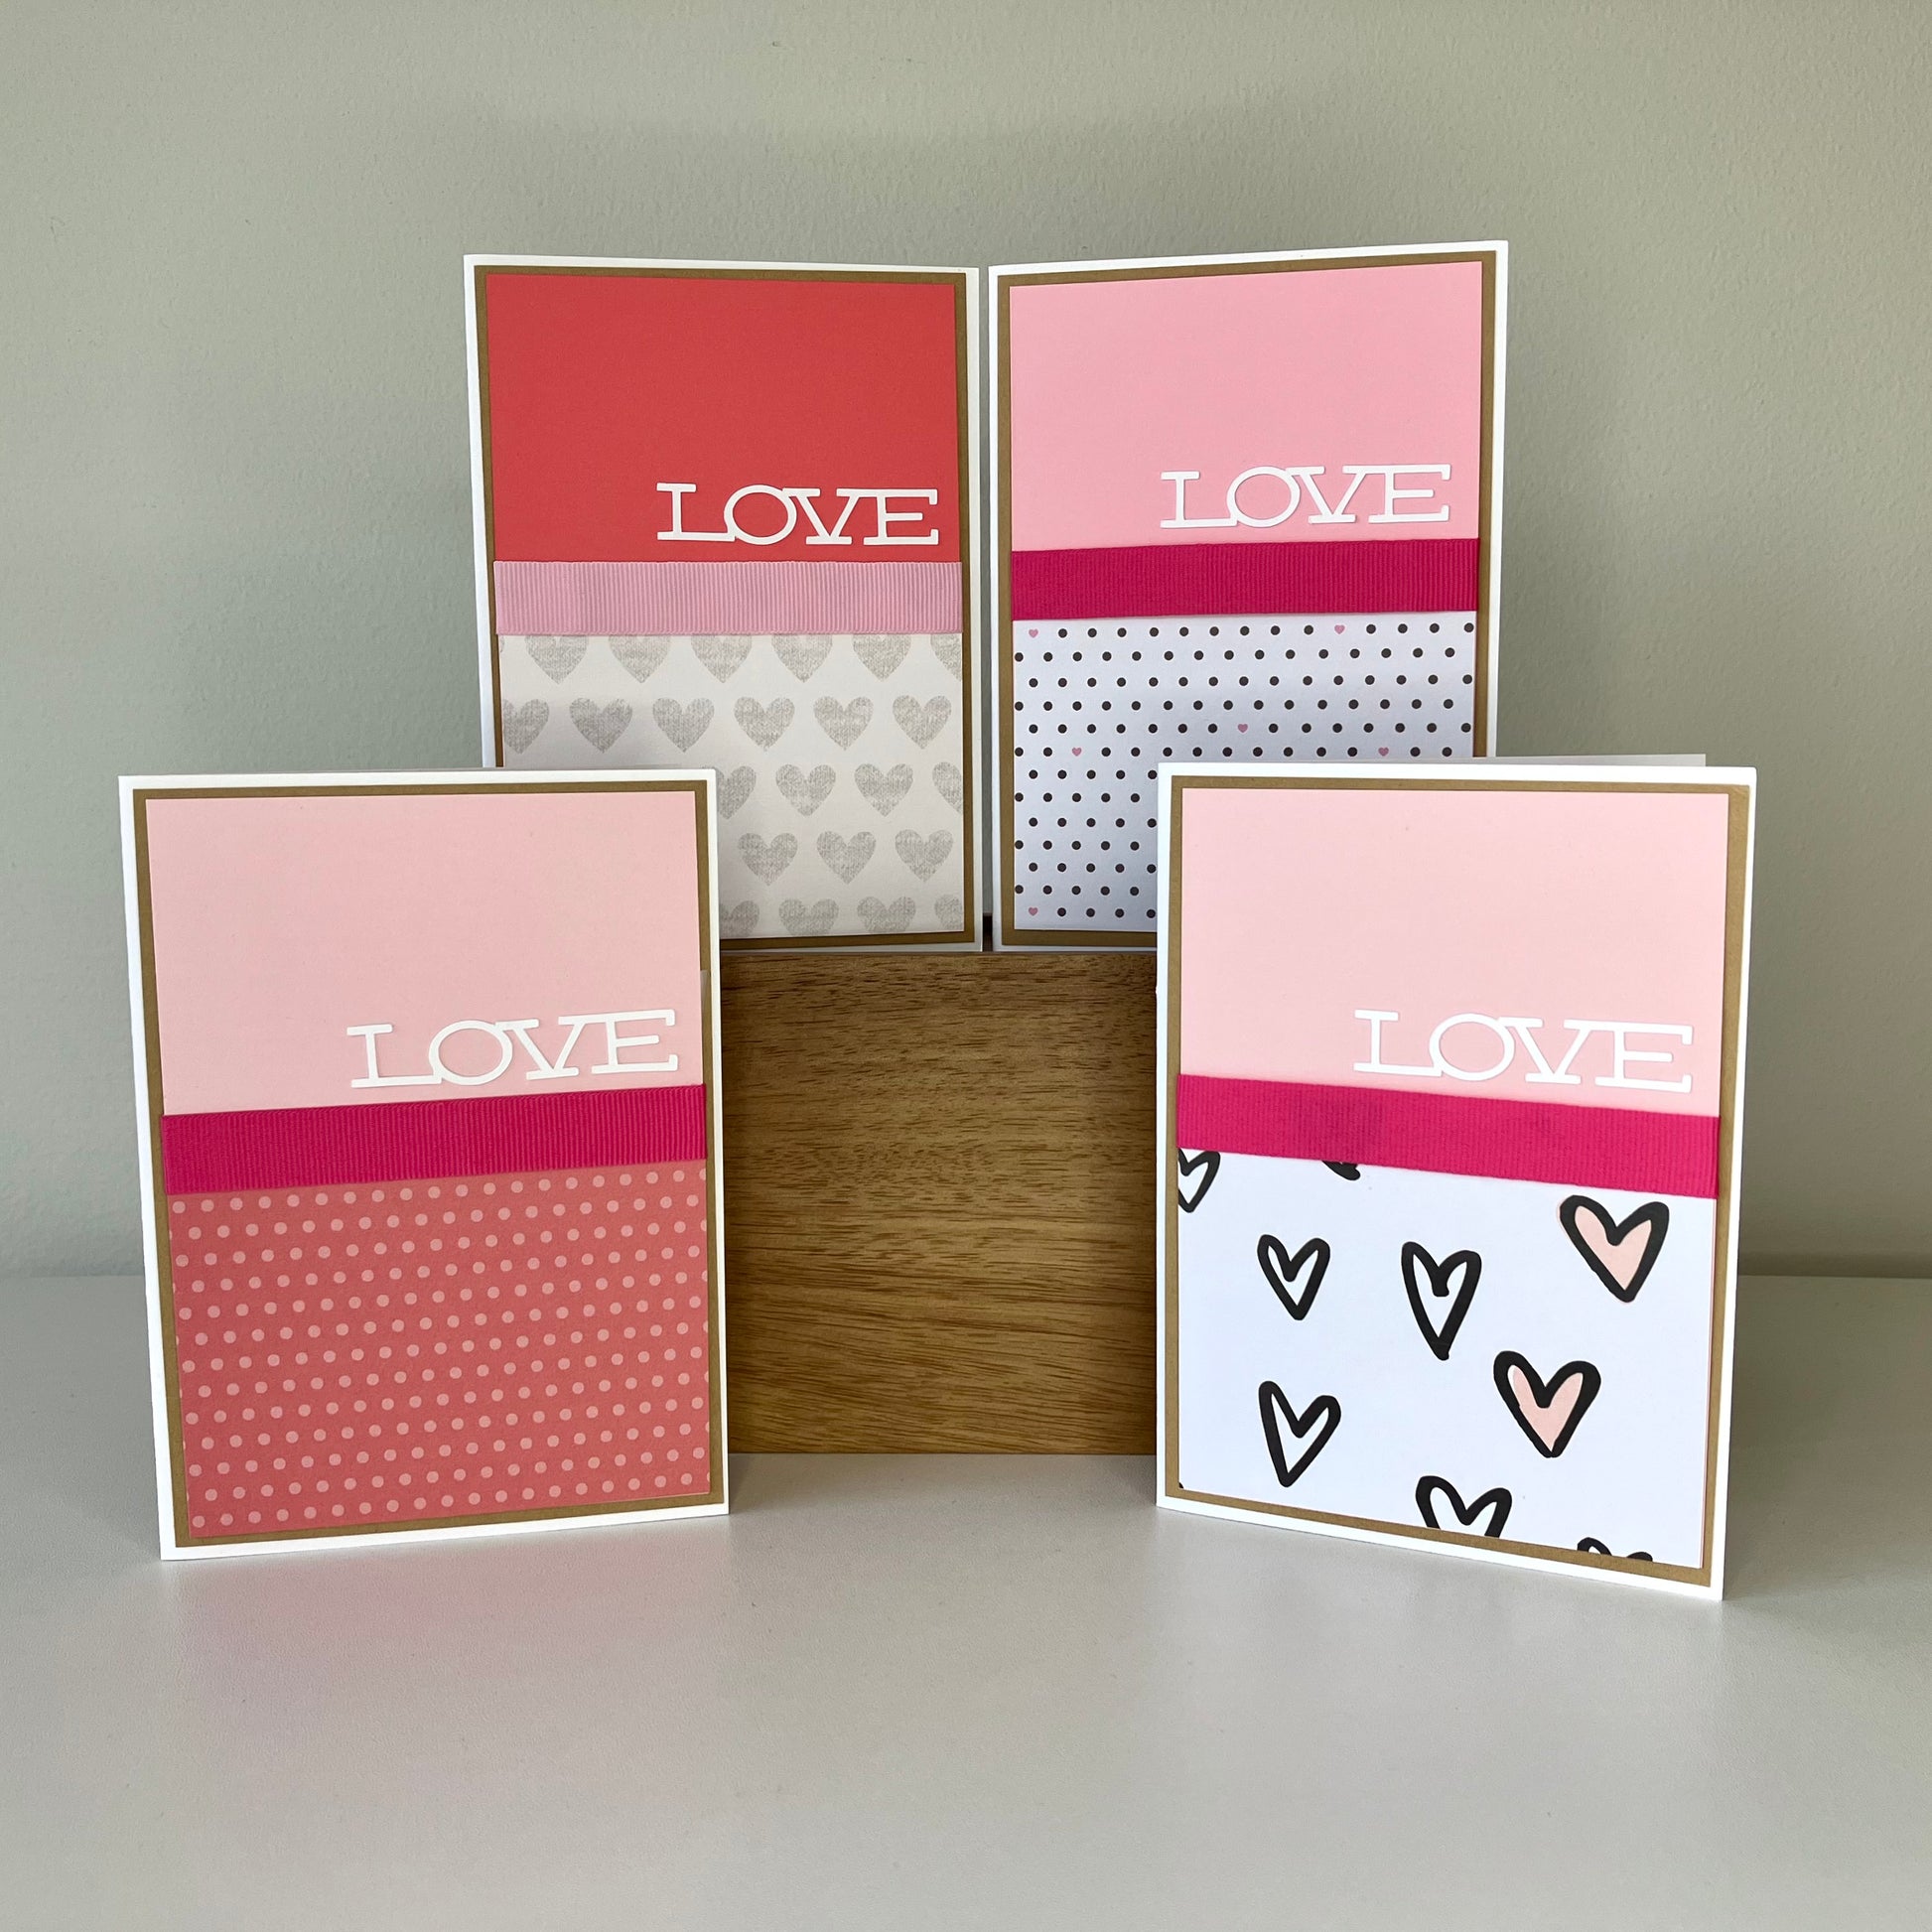 Love Greeting Cards with Ribbon Blank Inside